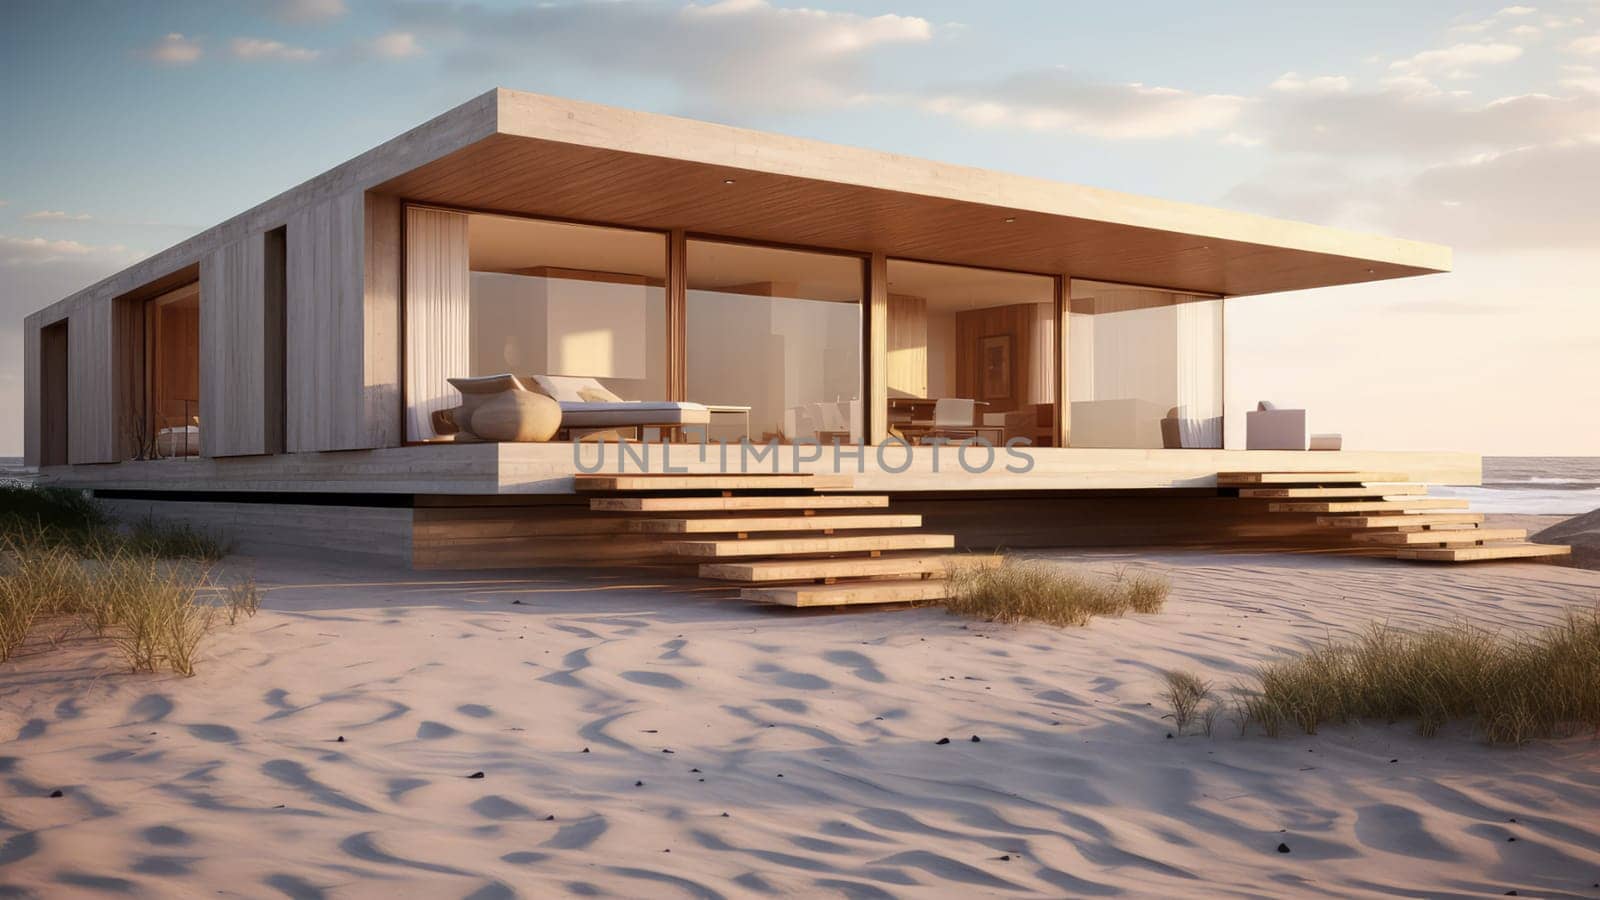 3D rendering of a modern house with outdoor concrete staircase on a beach. The house has a large window that overlooks the ocean.